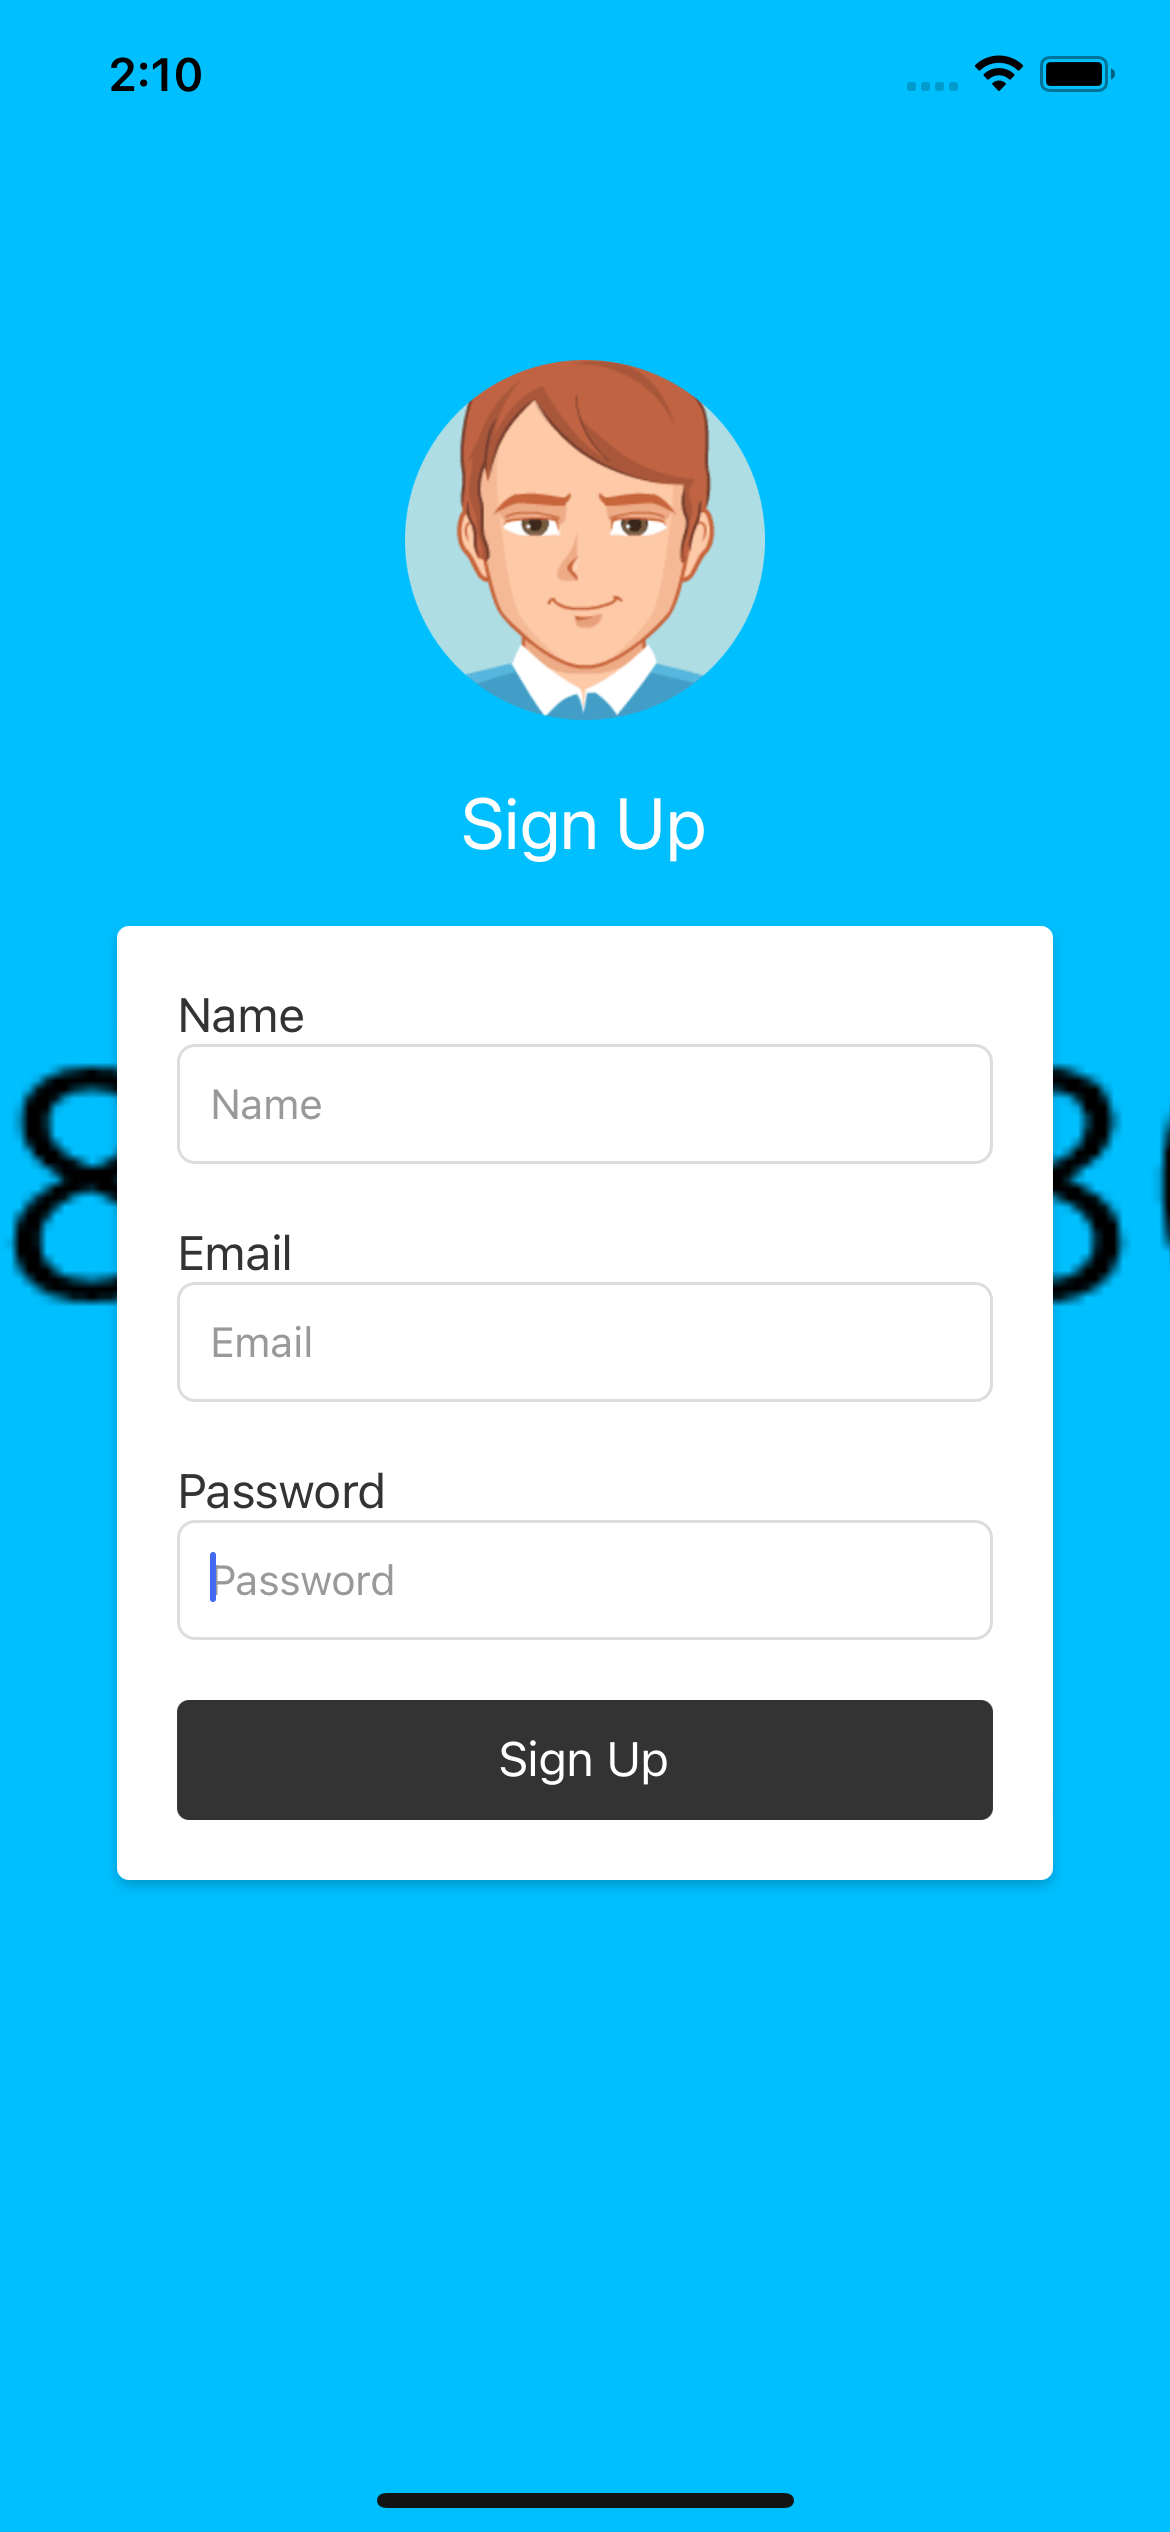 react native UI example. Sign up screen with background and logo